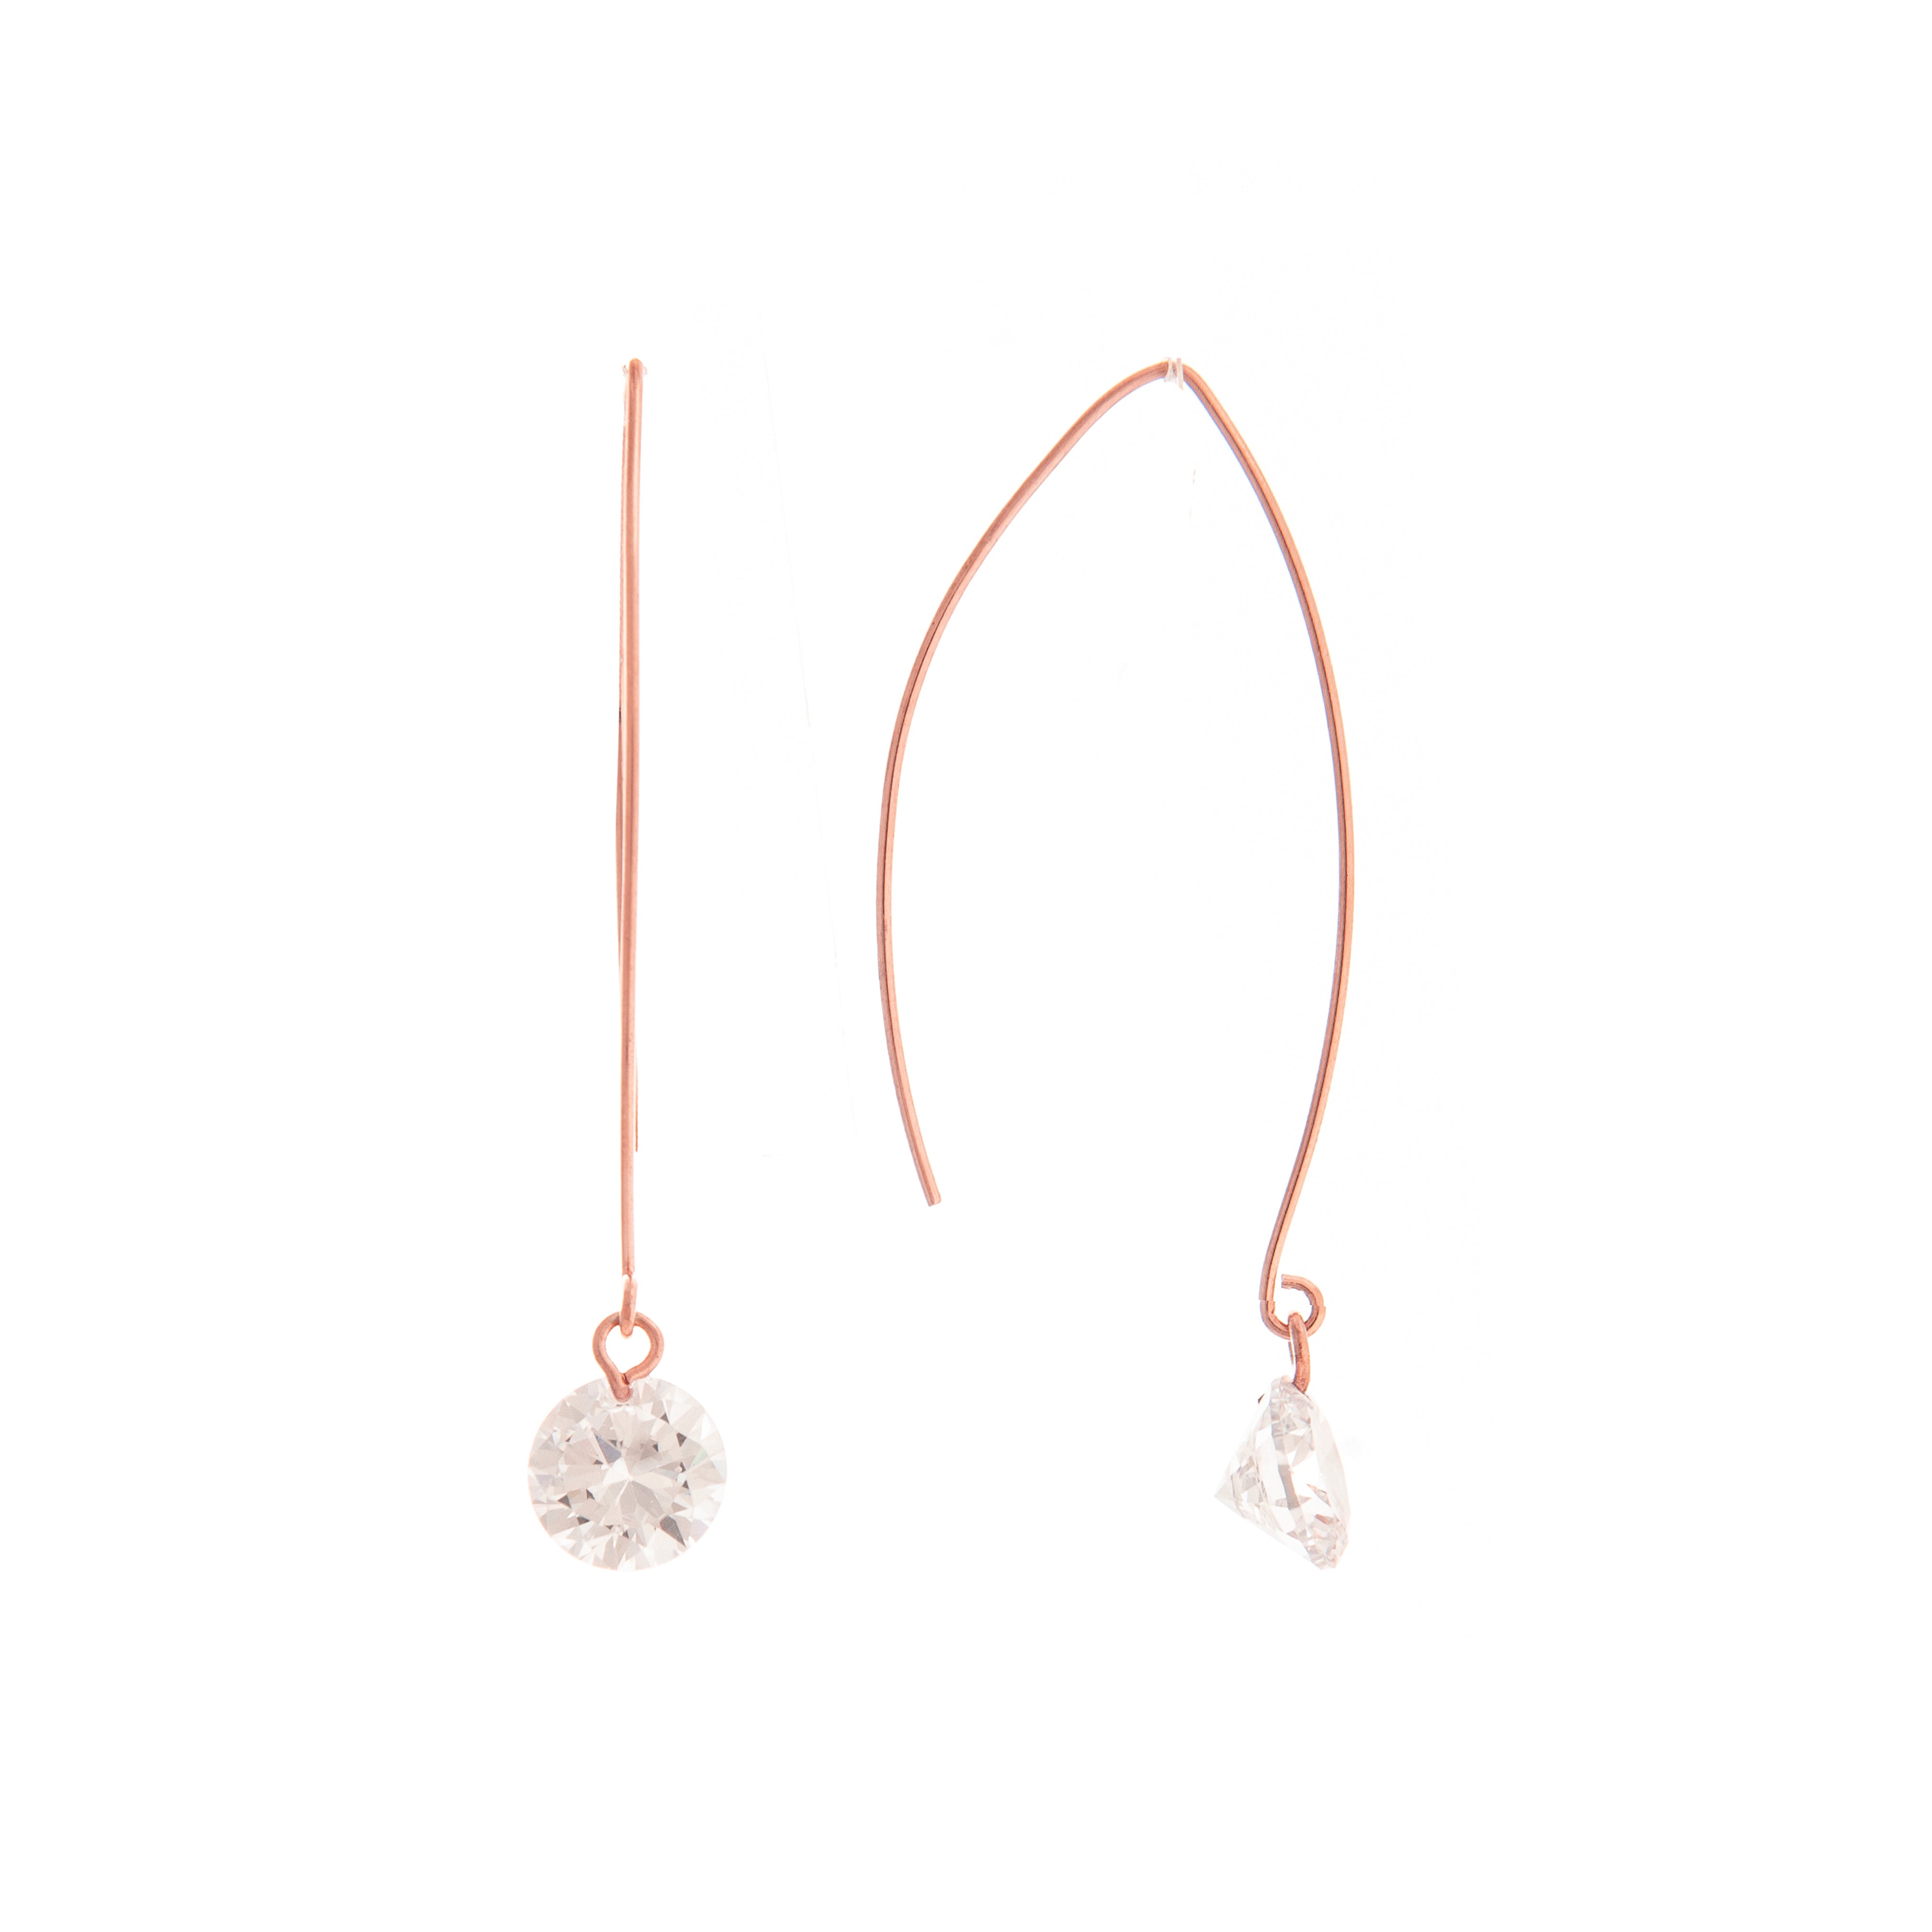 Cubic Zirconia Threader Drop Earrings - Available in Yellow Gold, Rose Gold, White Rhodium